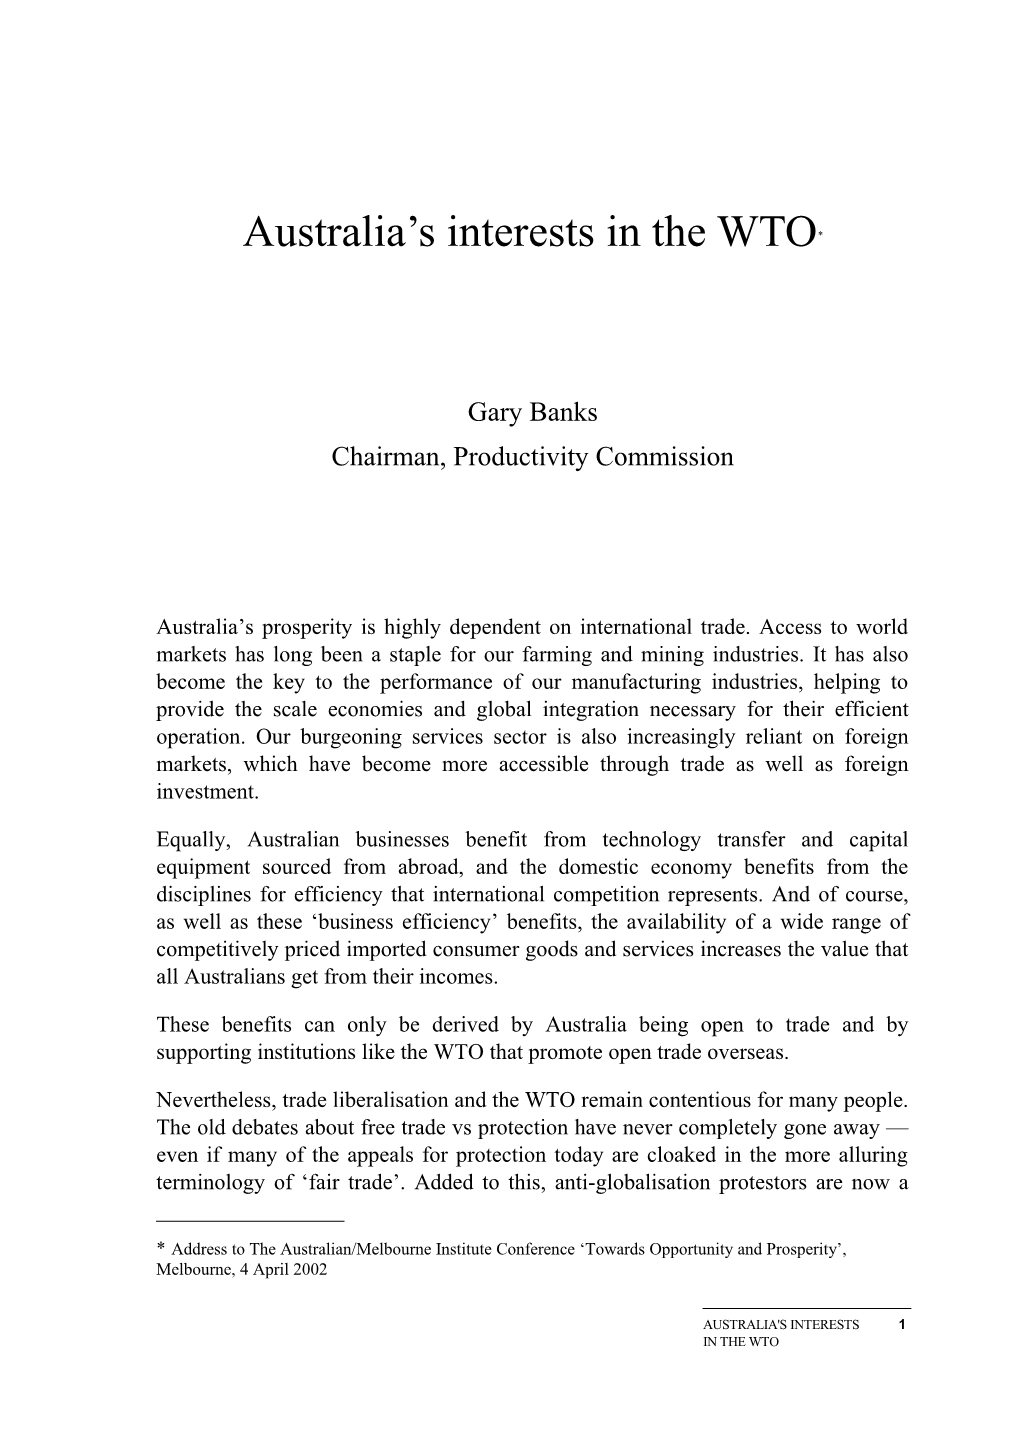 Australia's Interests in the WTO